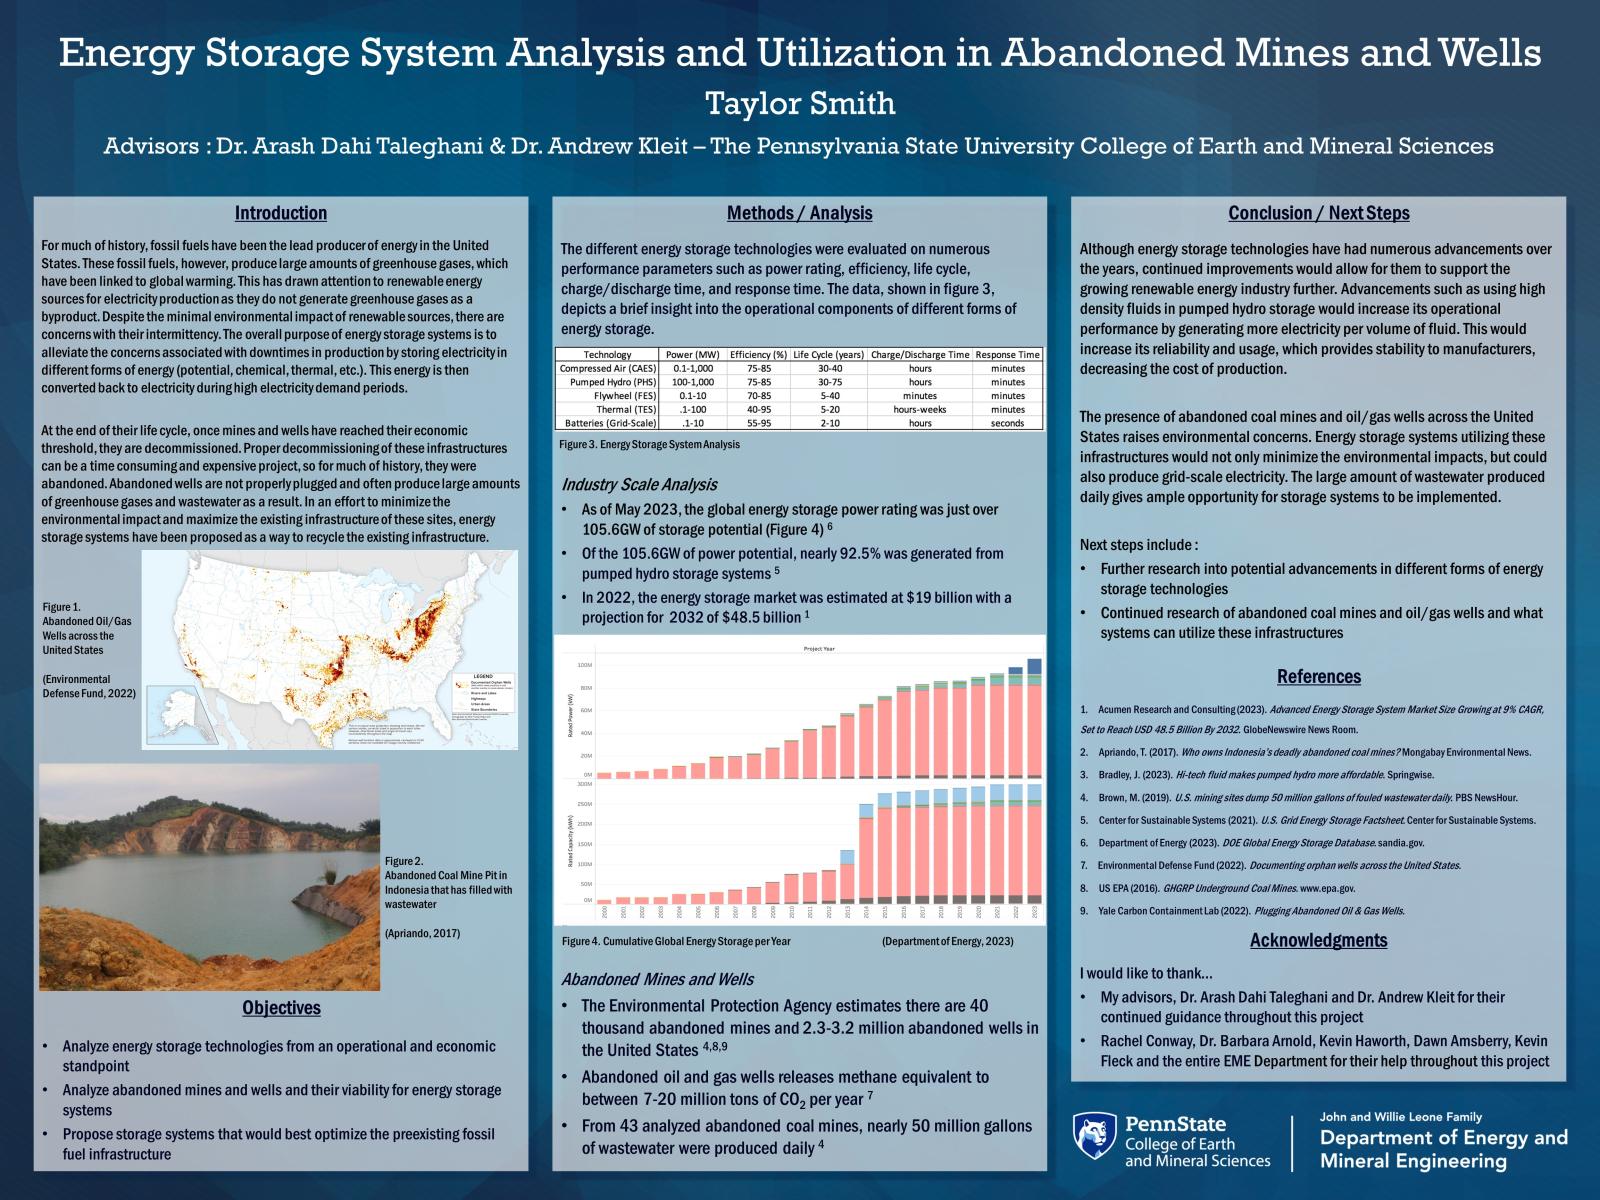 Taylor Smith research poster